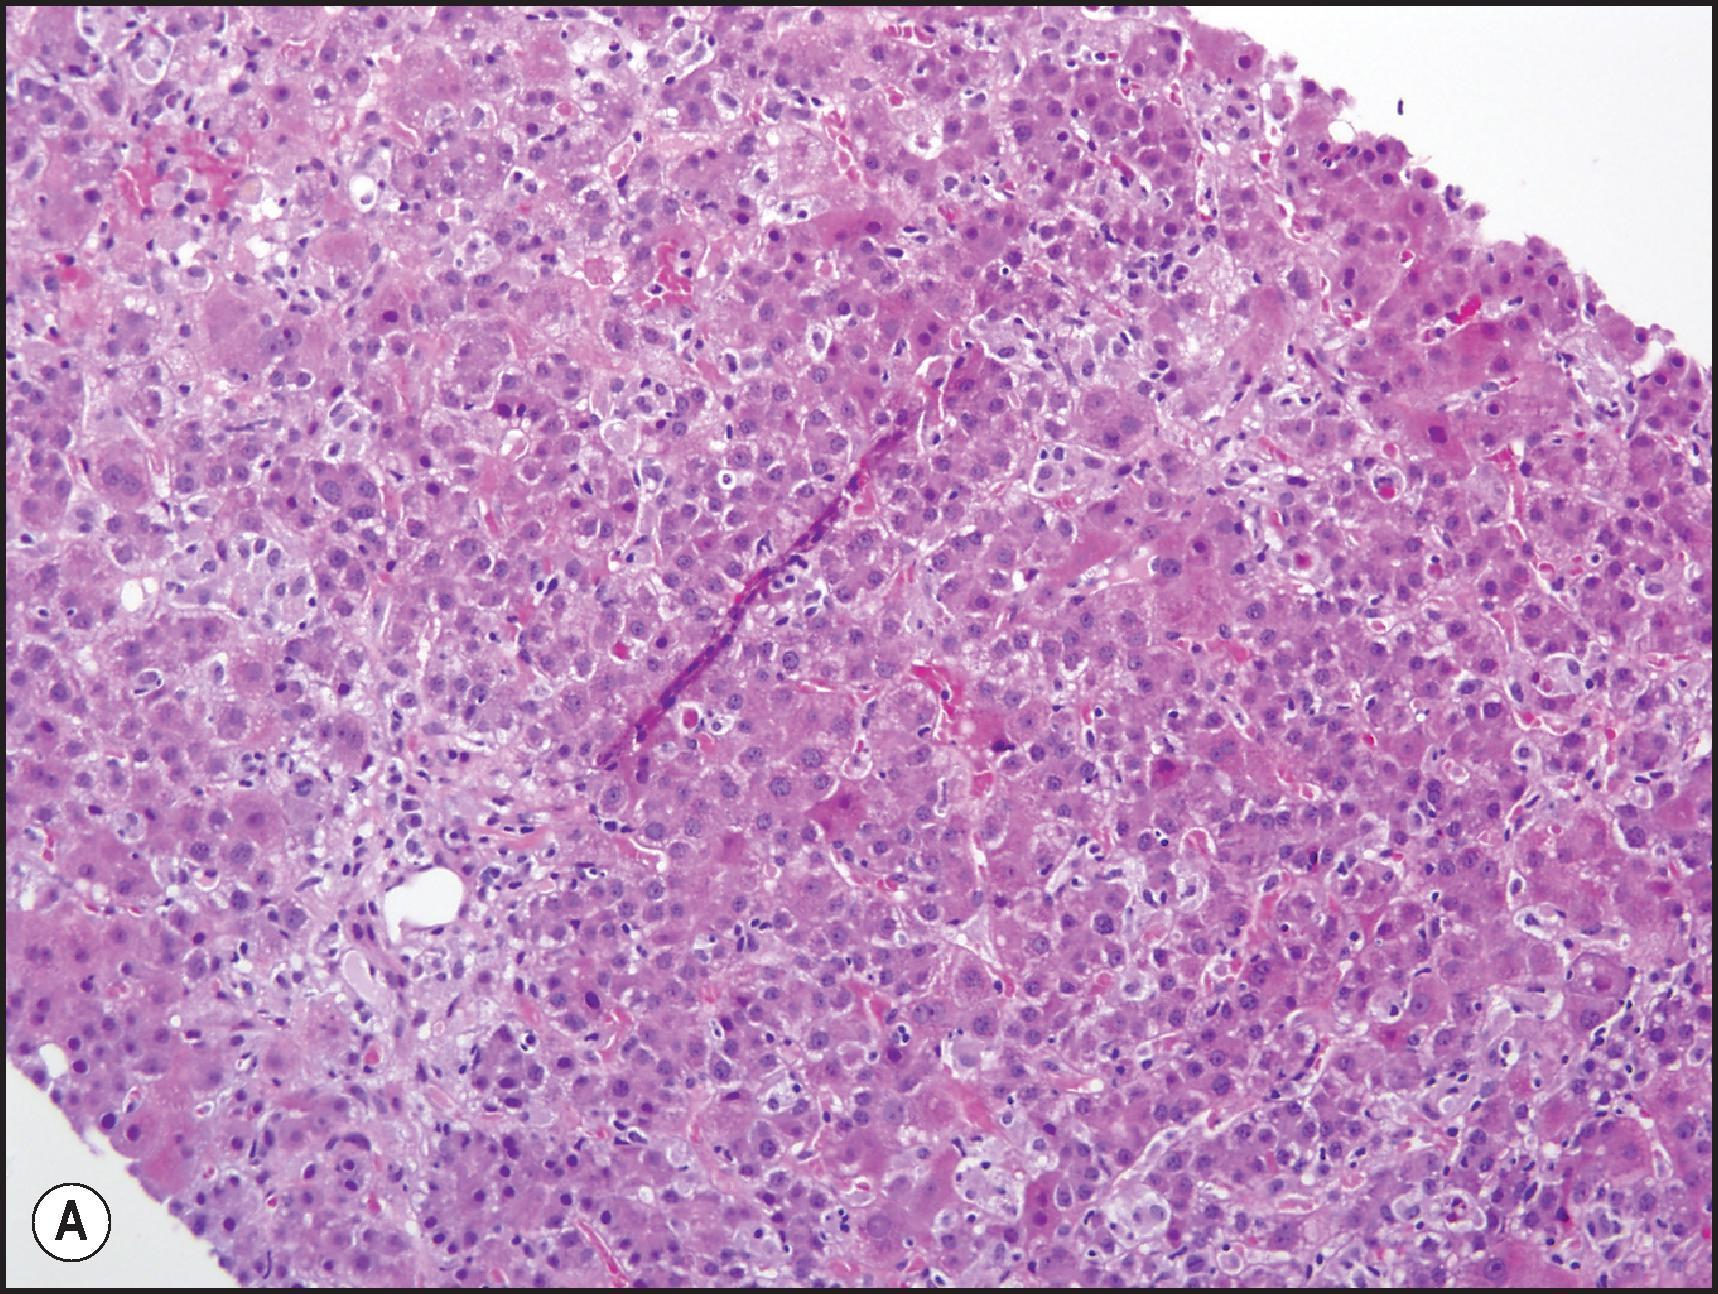 Figure 12.5, Etanercept injury. (A) Lobular disarray with hepatocyte rosette formation. (H&E.) (B) Apoptosis with lymphohistiocytic infiltrate. (C) Edge of a zone of necrosis with large aggregates of sinusoidal histiocytes. (H&E.) (D) Clusters of plasma cells at edge of necrosis. (H&E.) Case courtesy of DILIN.